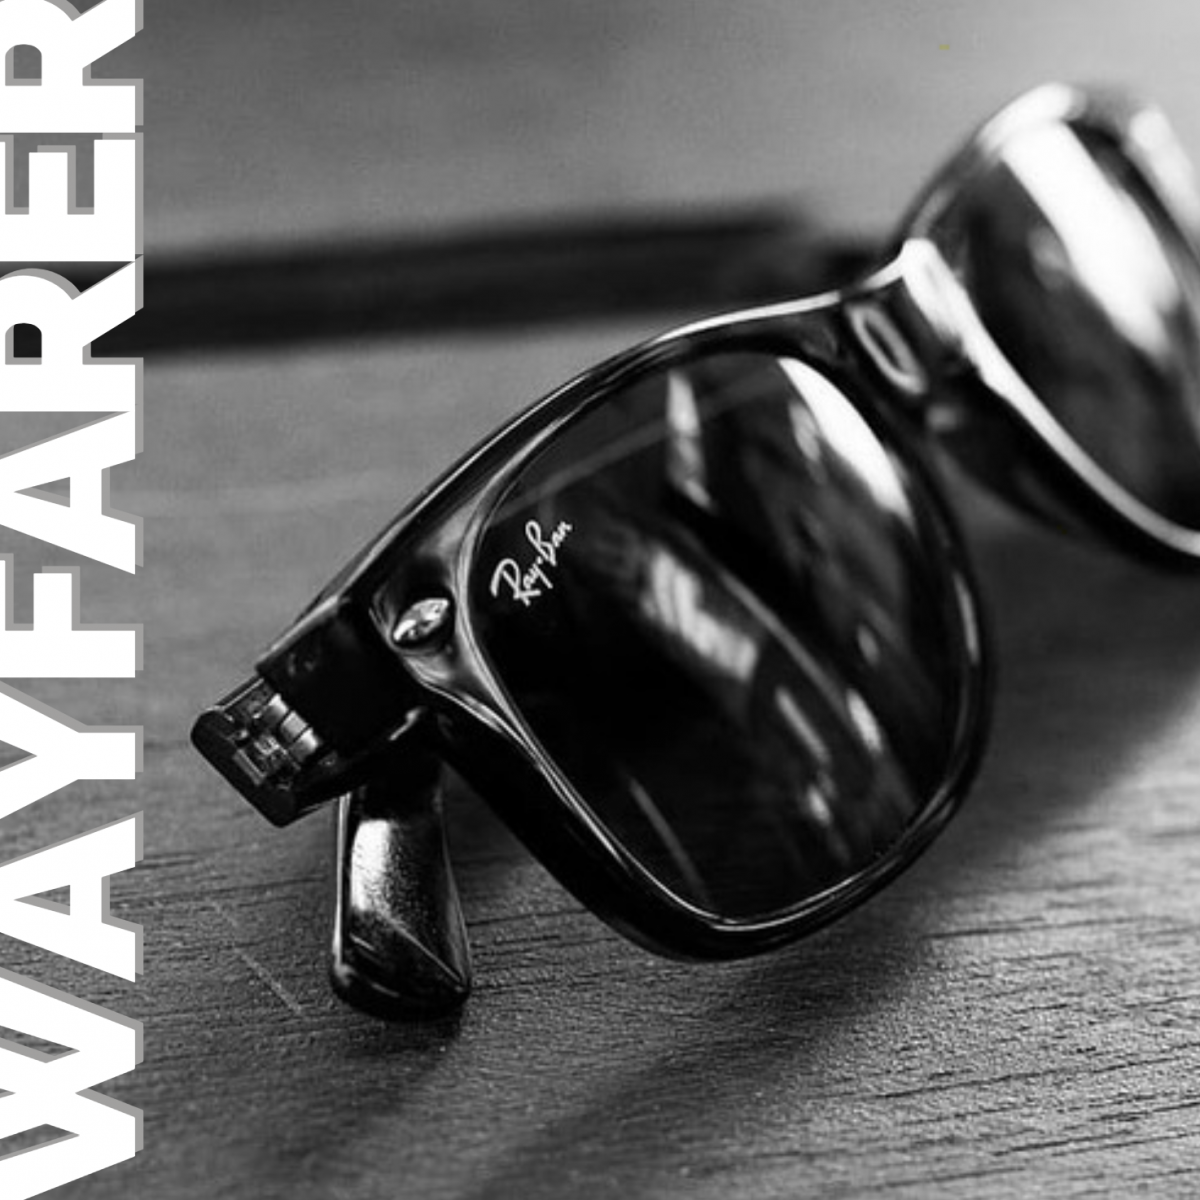 Begrænse Reskyd rapport Types of Ray-Ban Wayfarer Sunglasses—An American Classic - EZOnTheEyes